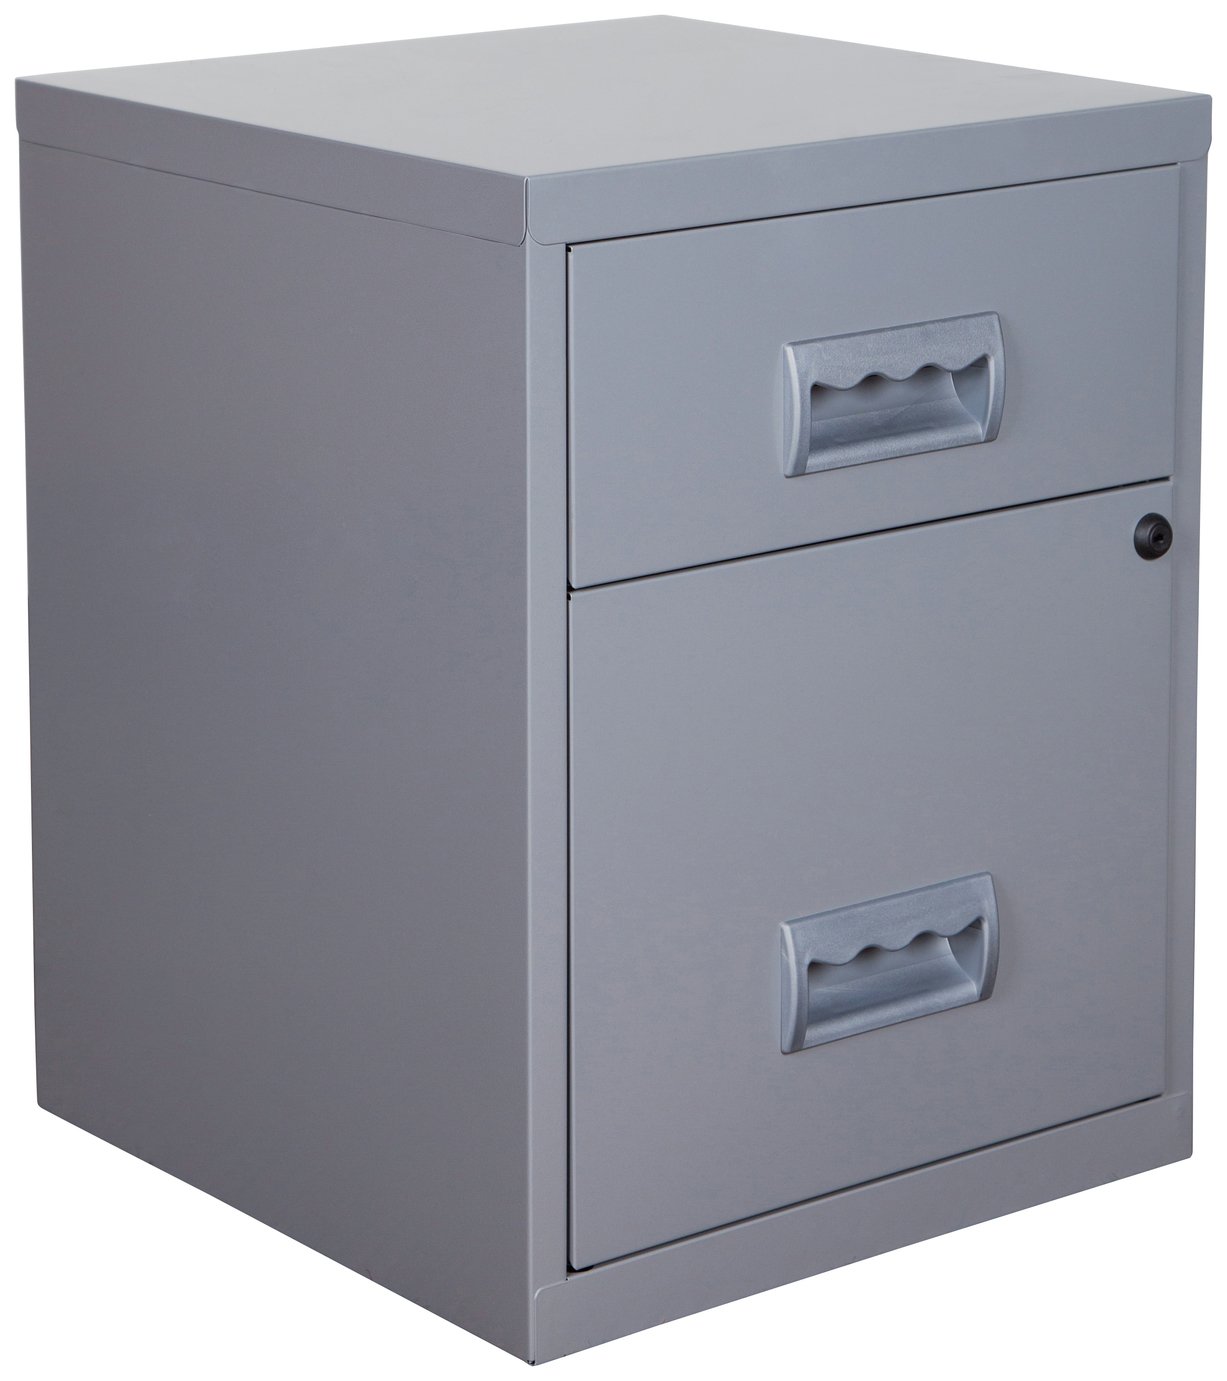 Pierre Henry 2 Drawer Combi Filing Cabinet - Silver